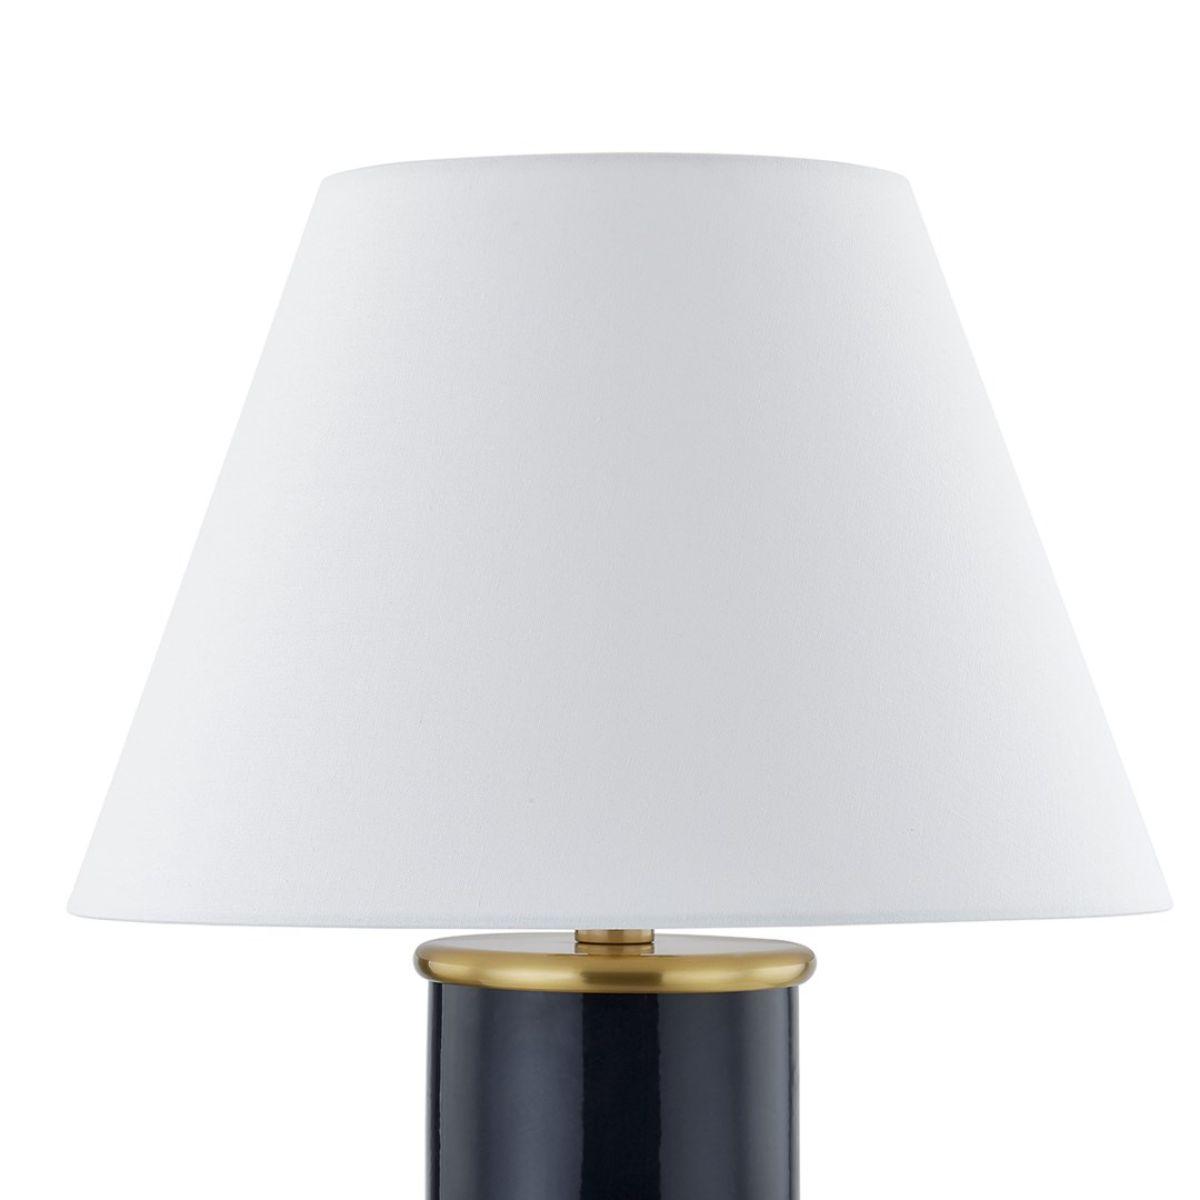 Banyan Table Lamp Ceramic Gloss Navy with Aged Brass Finish